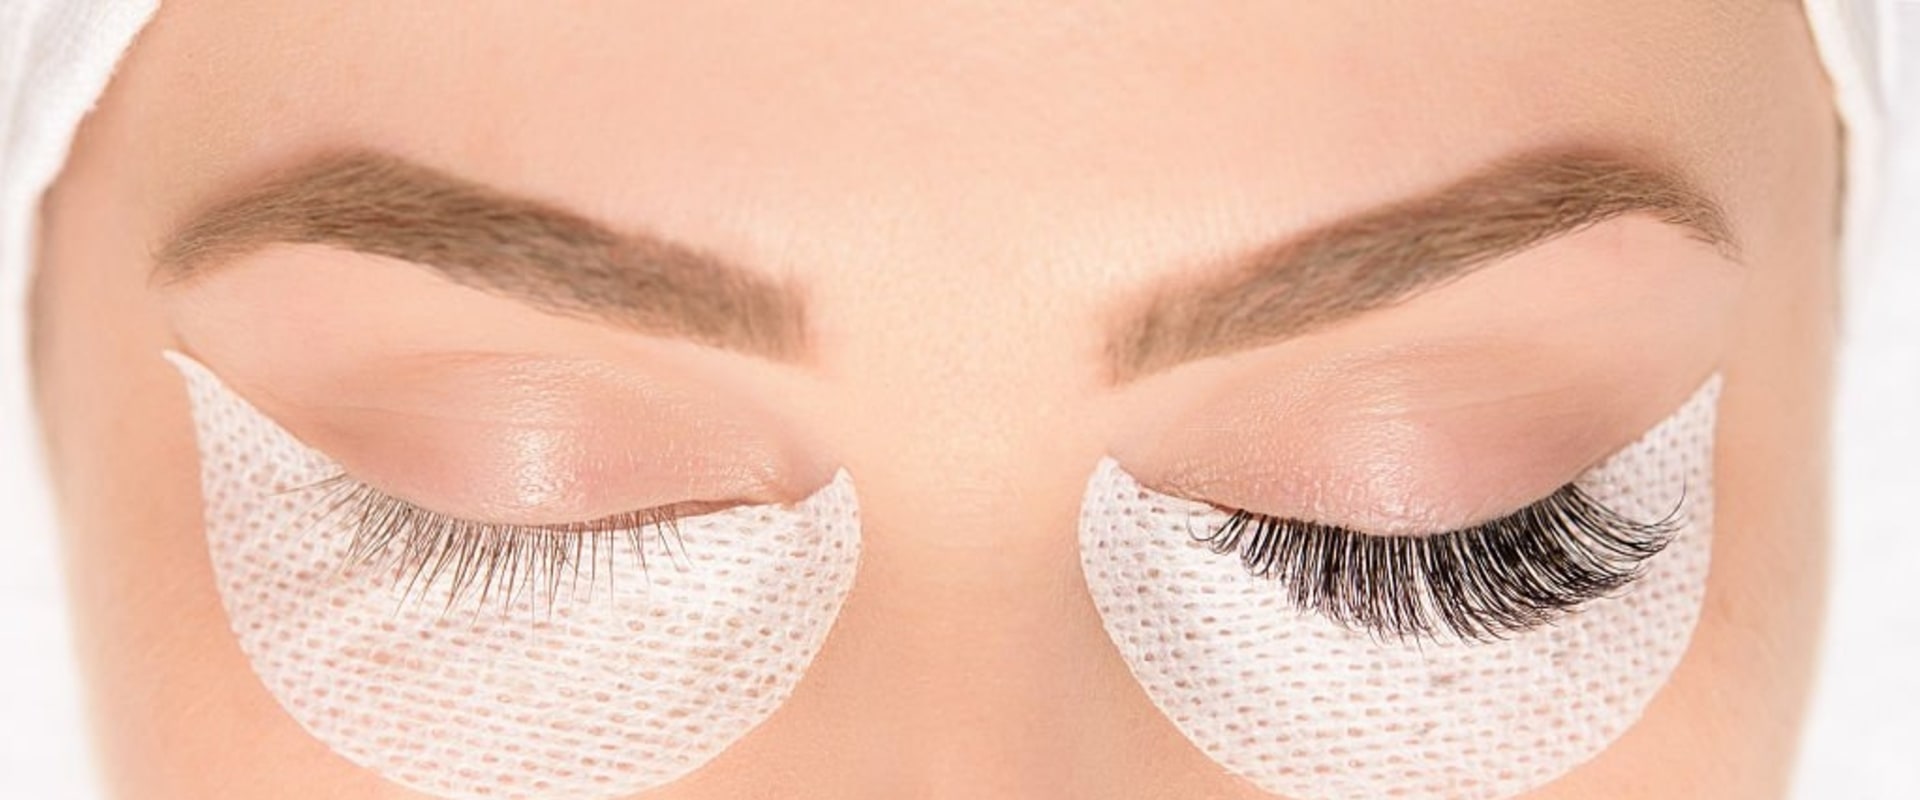 How do you thin out lash extensions that are too thick?